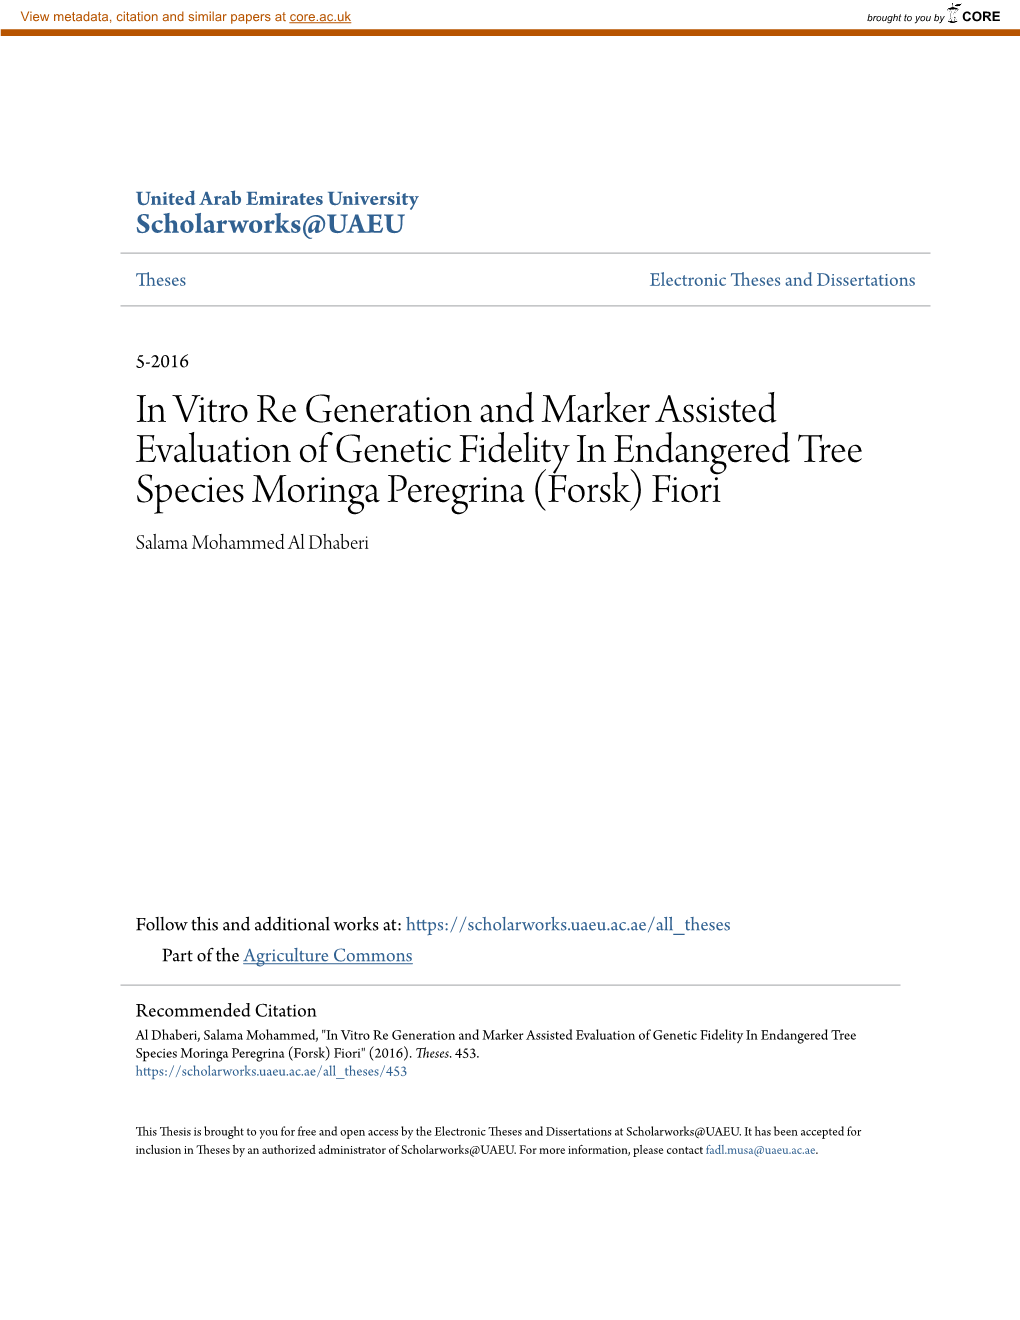 In Vitro Re Generation and Marker Assisted Evaluation of Genetic Fidelity in Endangered Tree Species Moringa Peregrina (Forsk) Fiori Salama Mohammed Al Dhaberi